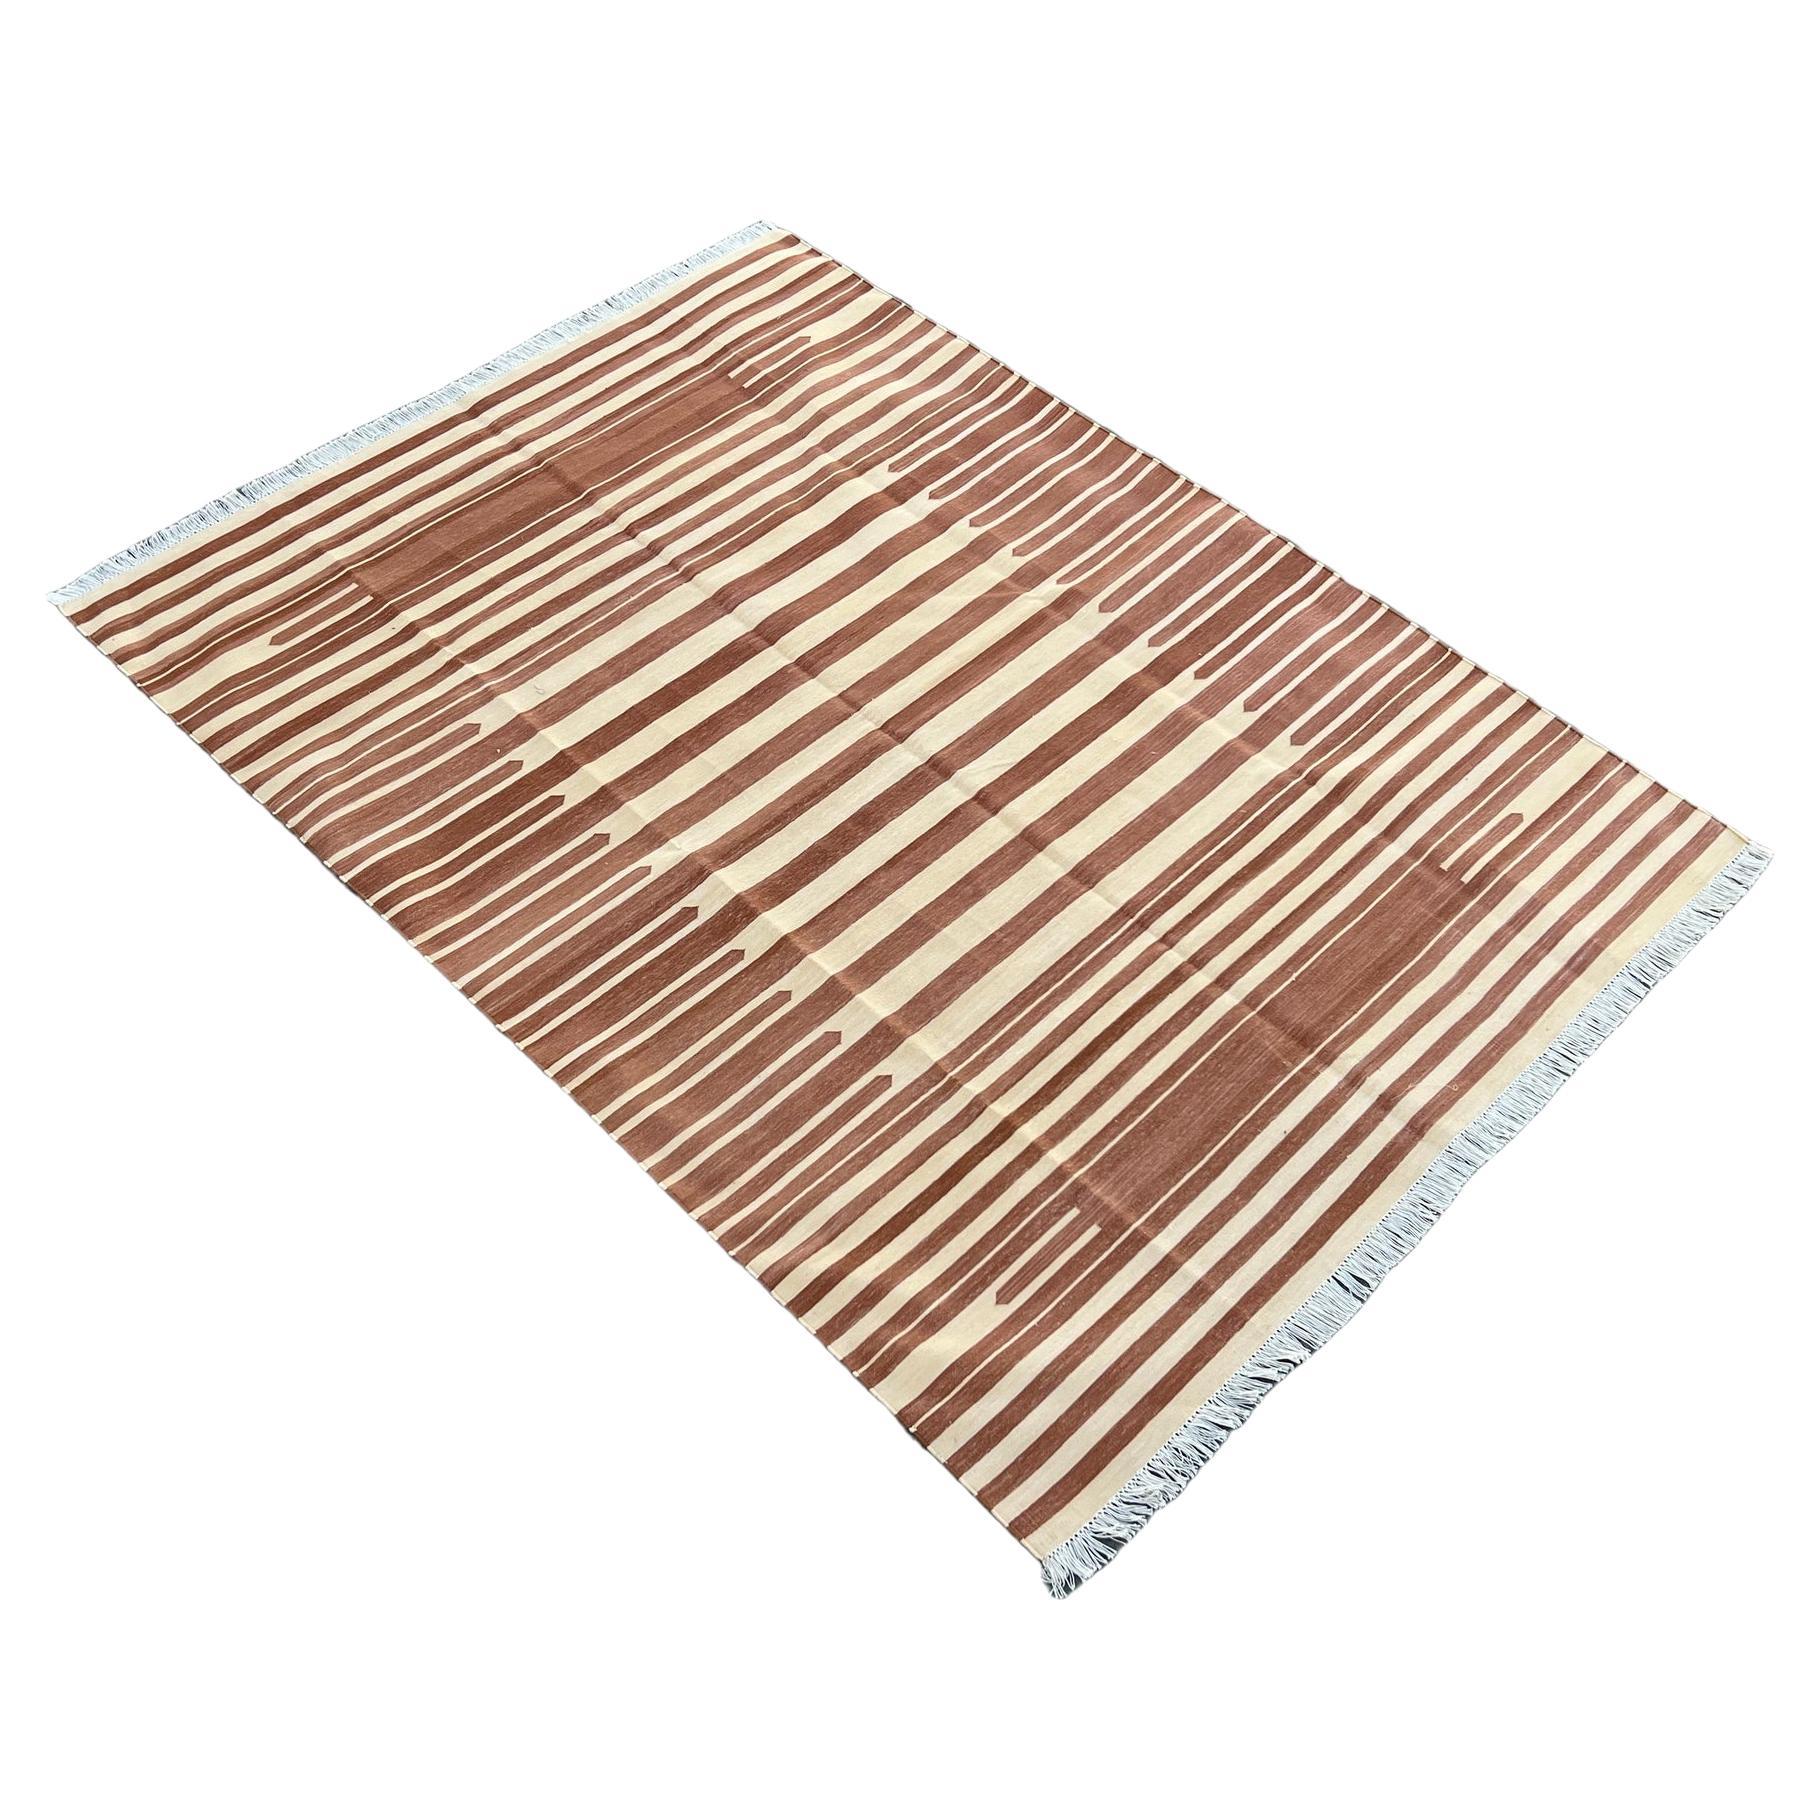 Handmade Cotton Area Flat Weave Rug, 5x7 Tan And Cream Striped Indian Dhurrie For Sale